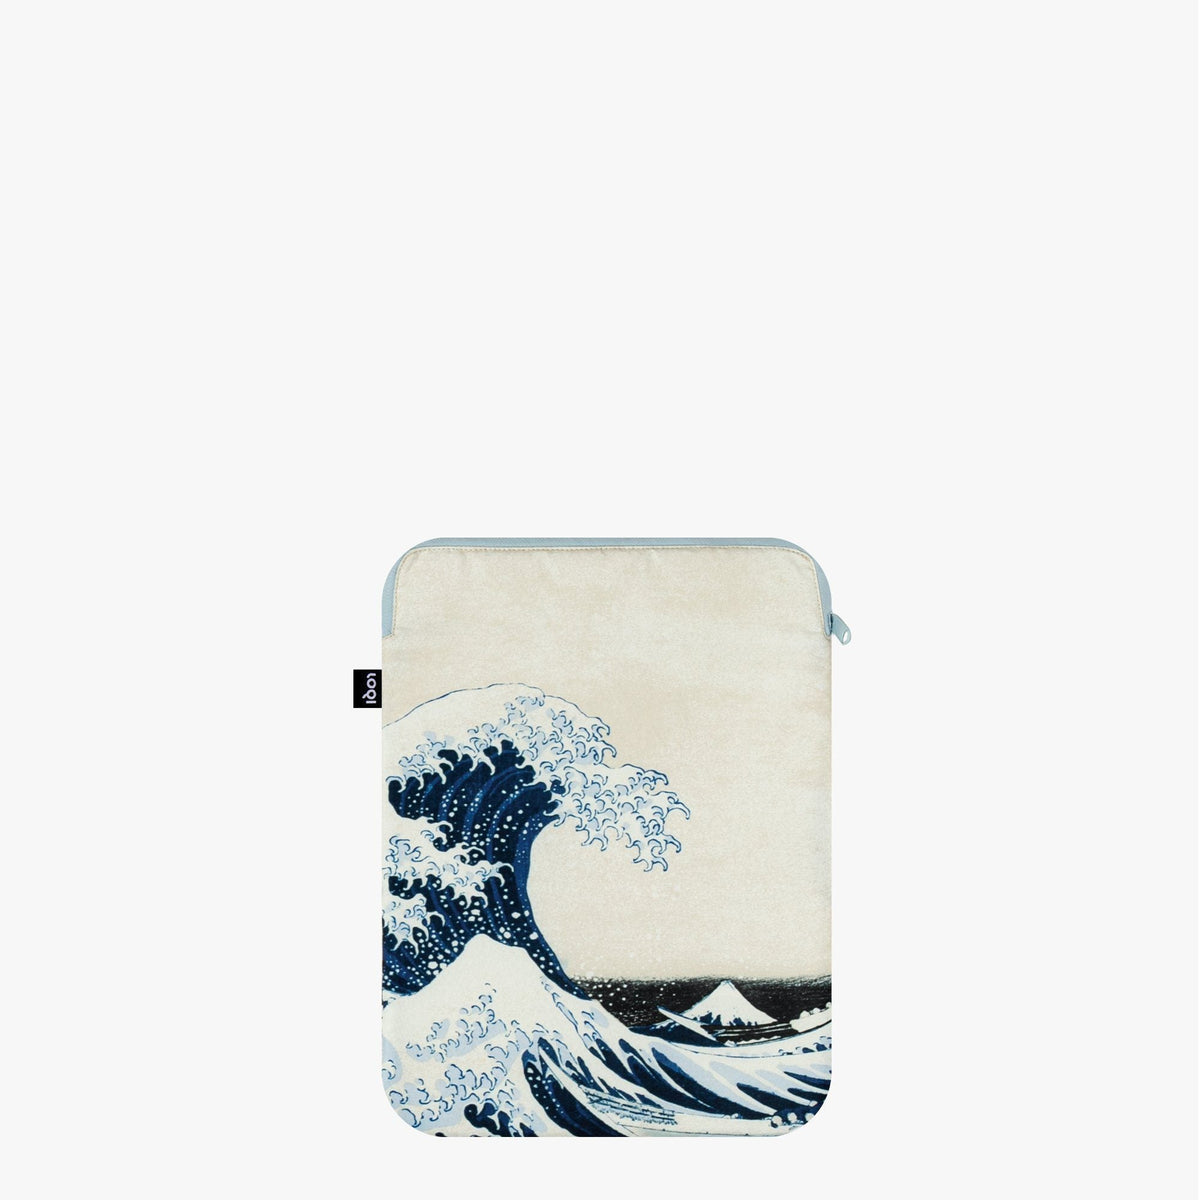 The Great Wave Recycled Laptop Cover 26 x 36 cm